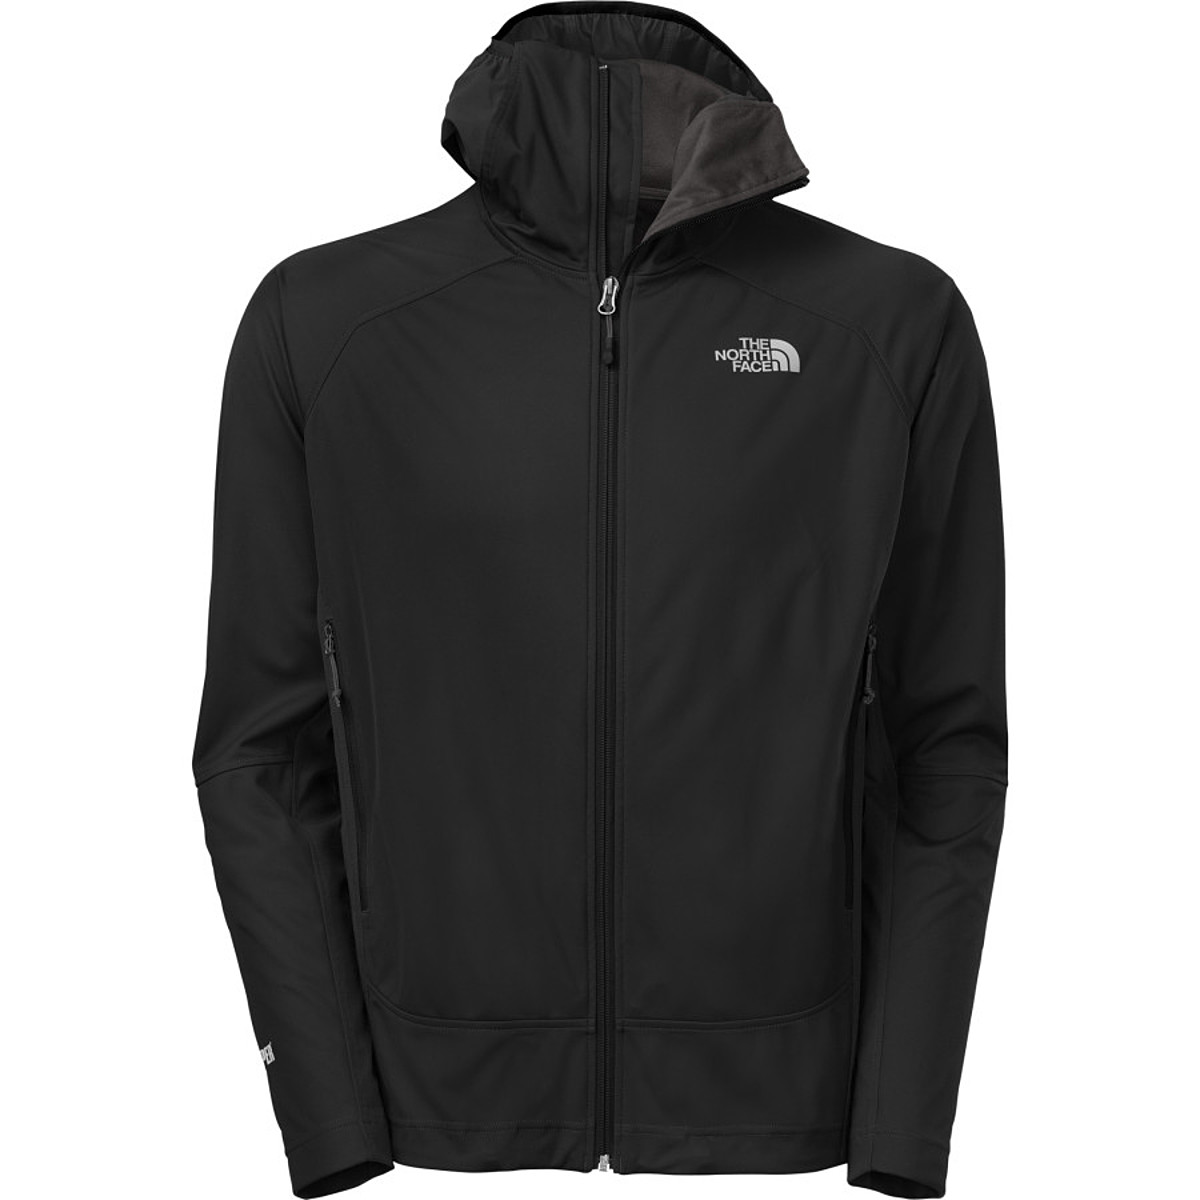 The North Face Cipher Hybrid Jacket Reviews - Trailspace.com